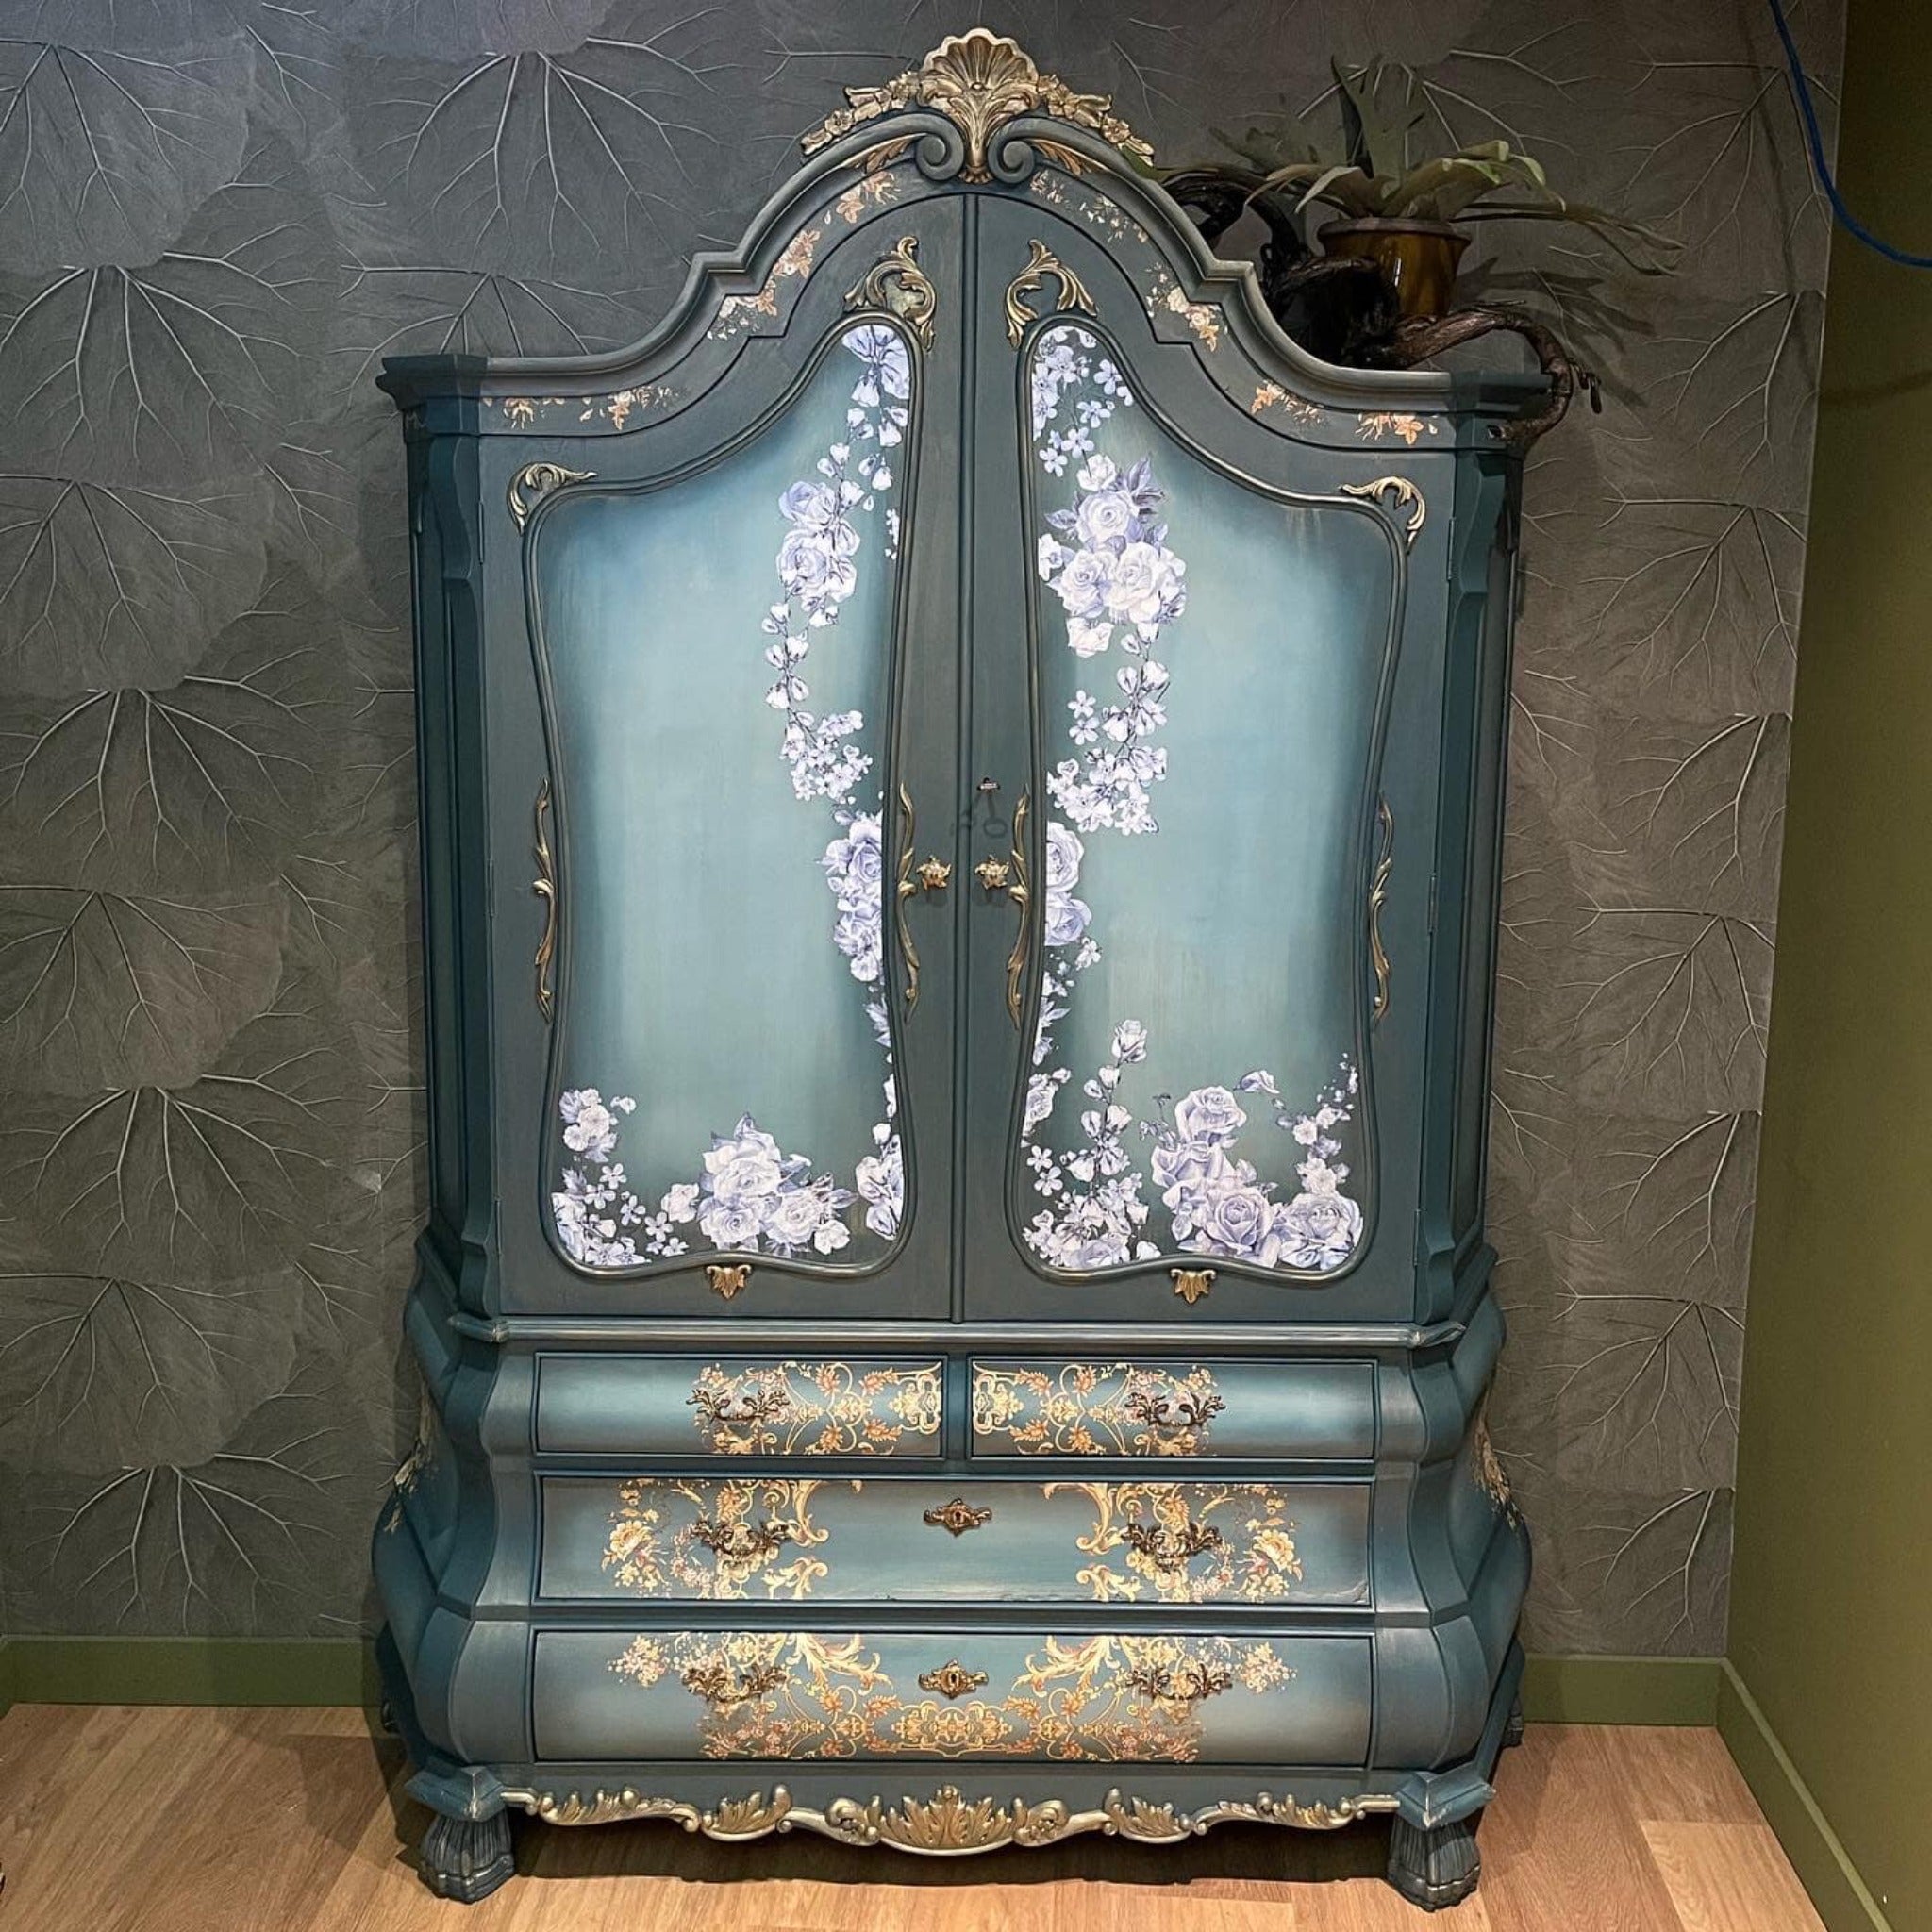 A vintage armoire refurbished by Stylish Interior is painted a metallic muted blue with a lighter blue ombre center on the doors and features ReDesign with Prima's Kacha Orleans transfer on its drawers.